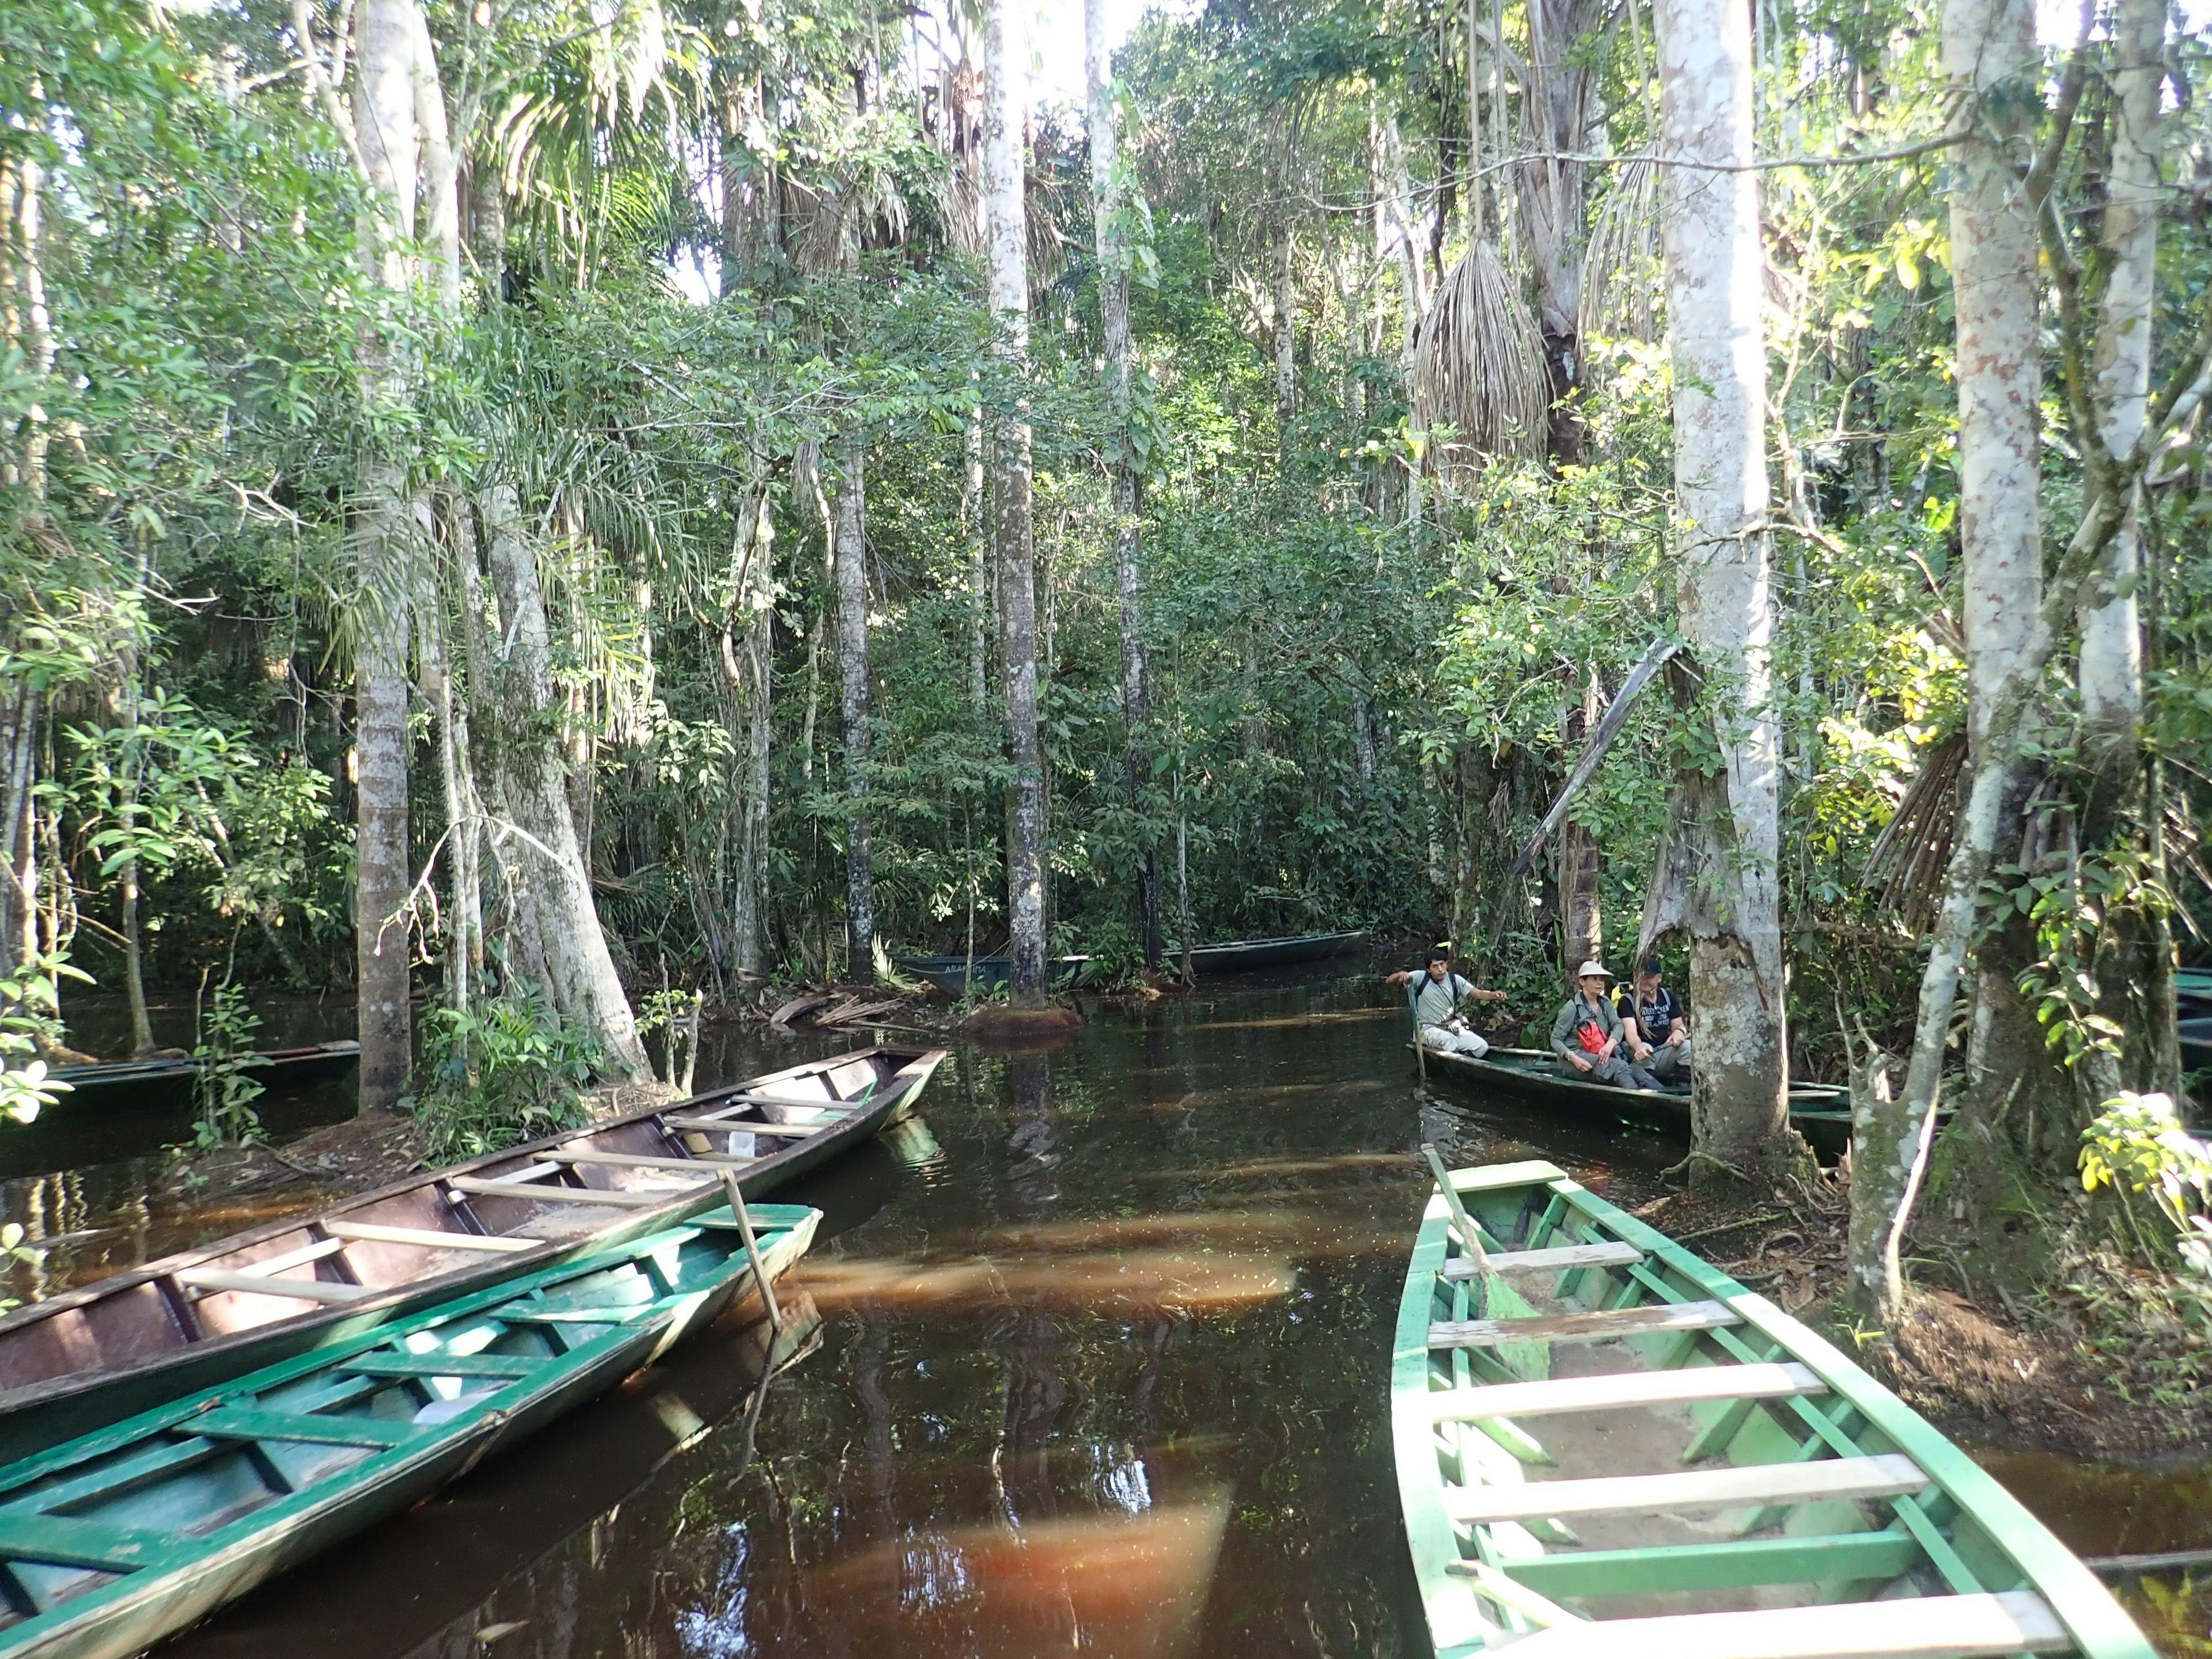 Canoes in the marsh